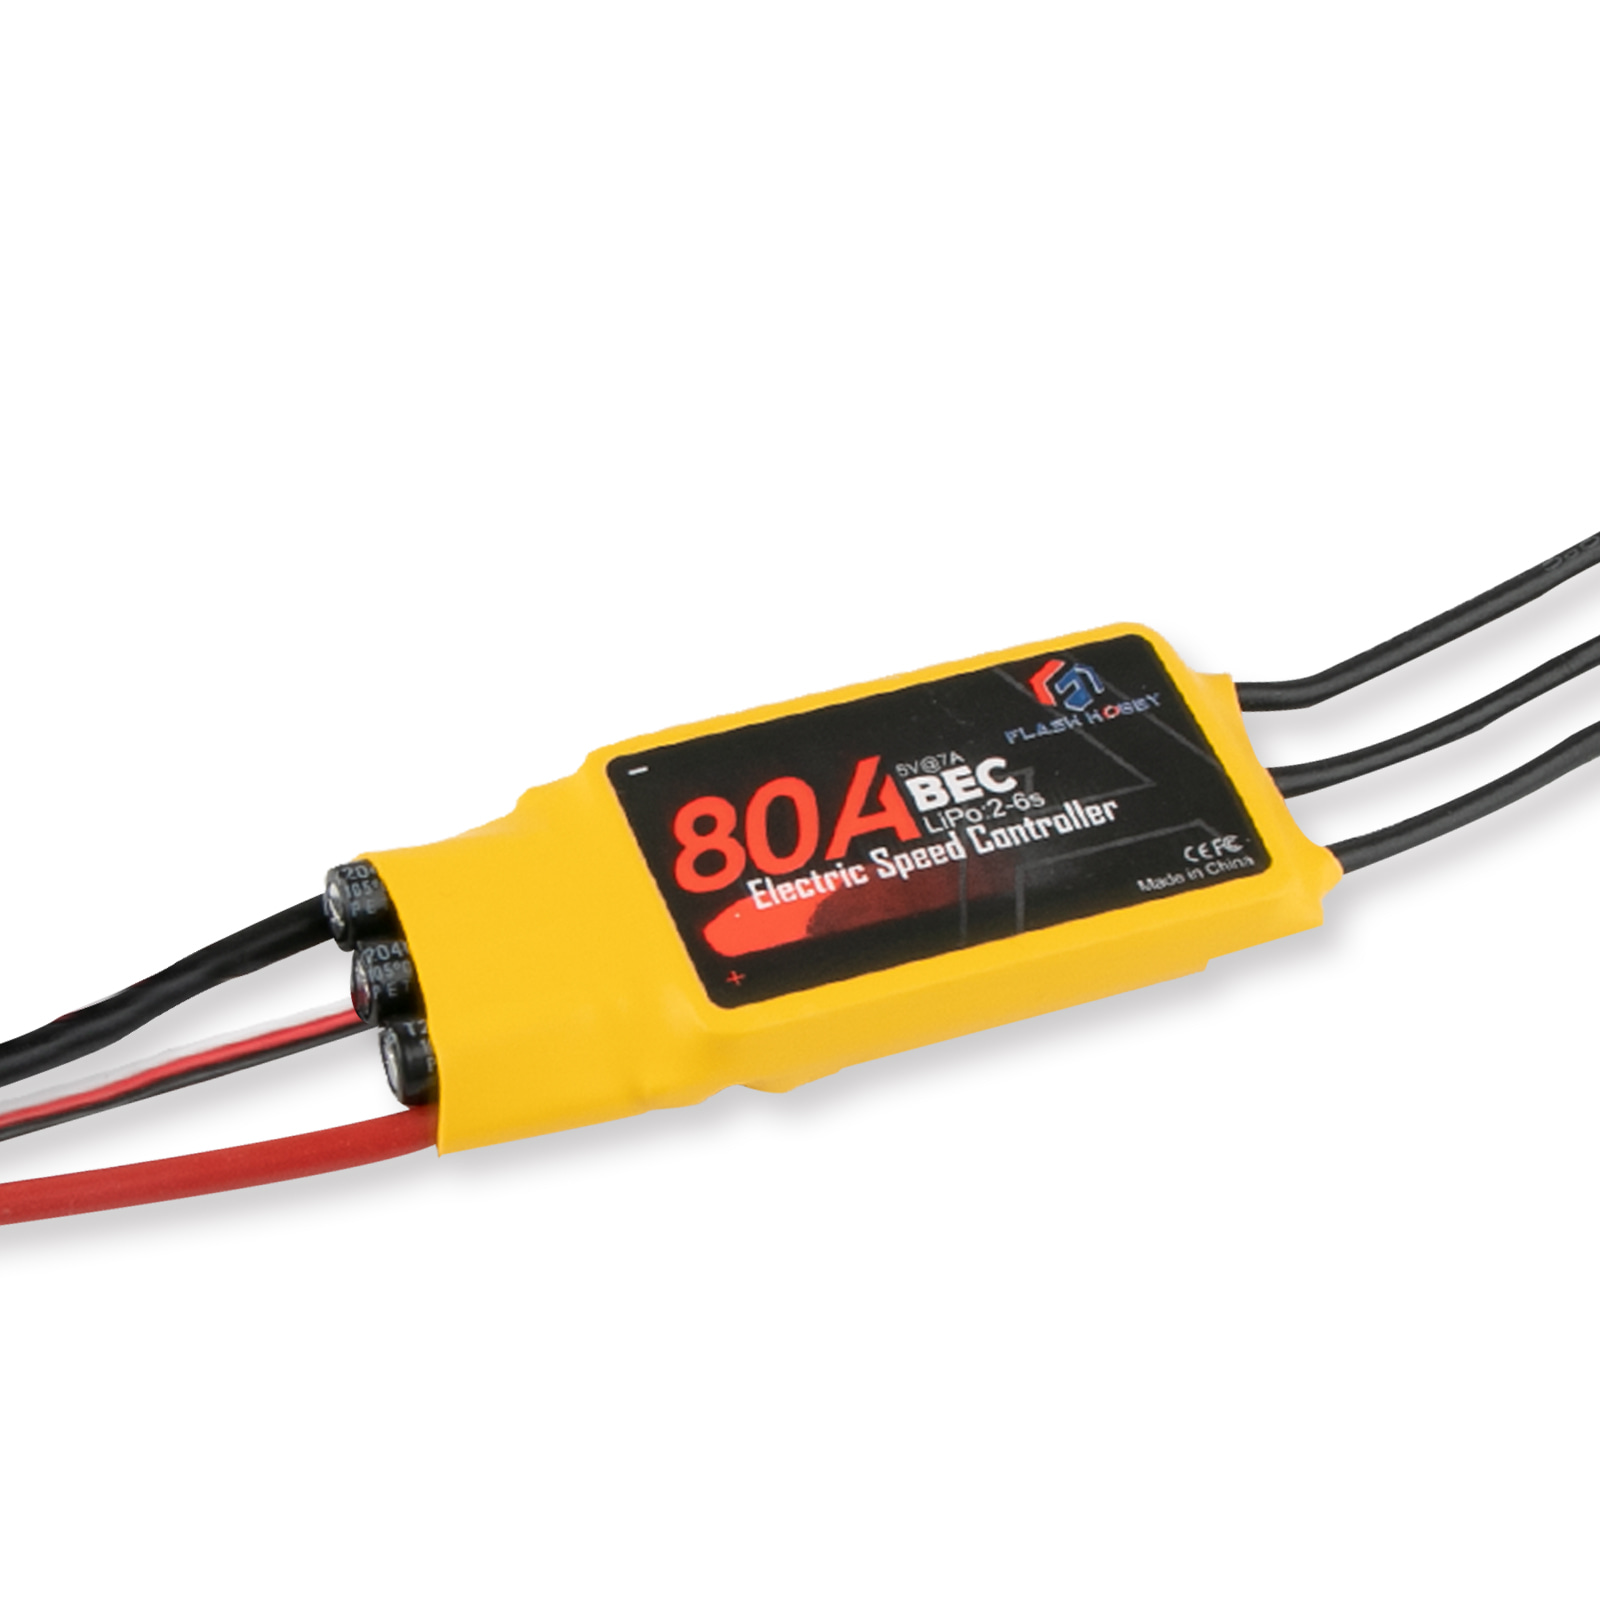 60A 80A Airplane Brushless ESC